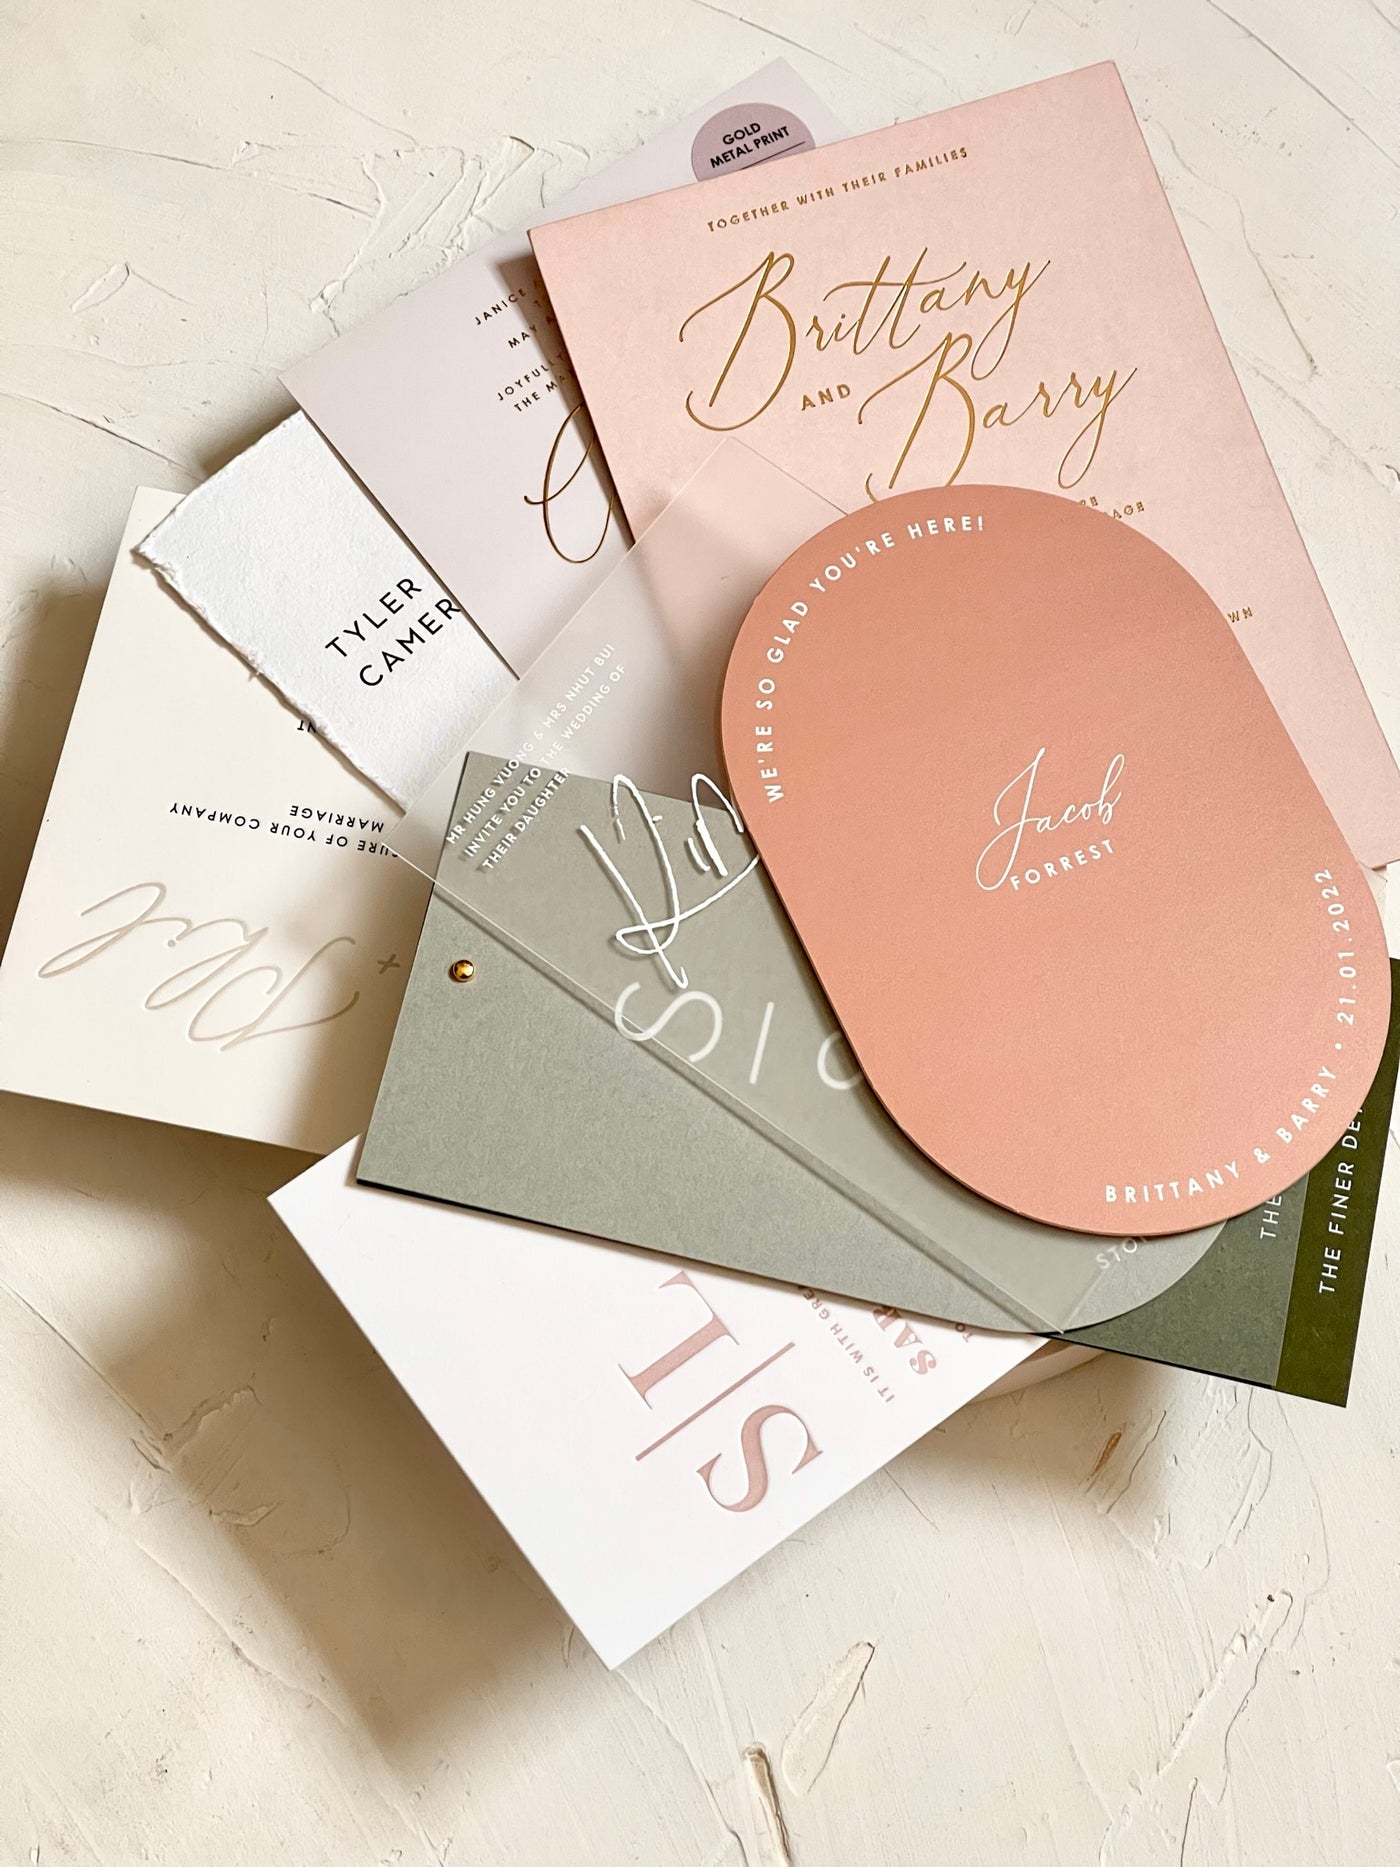 The Essential Wedding Stationery Planning Kit